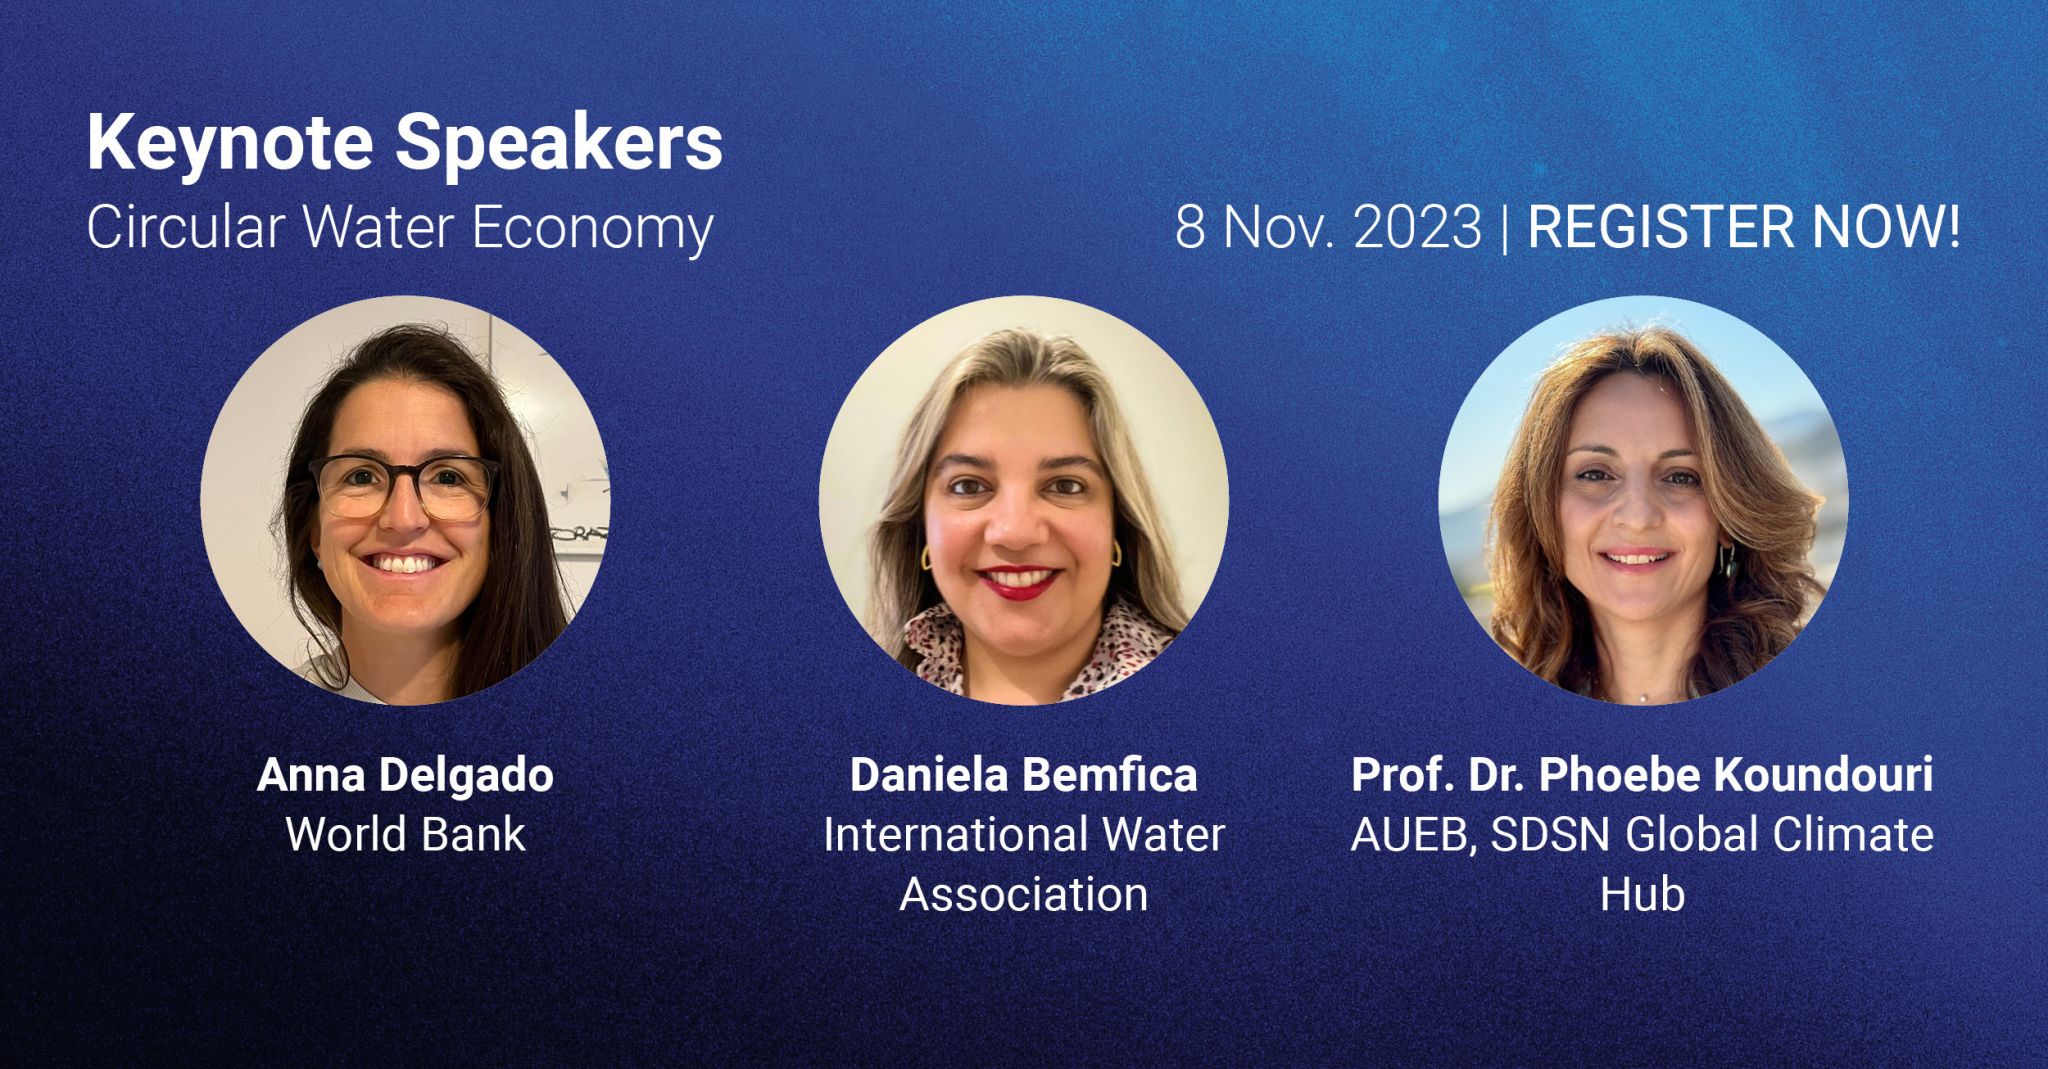 Keynote Speakers confirmed!We&rsquo;re thrilled to announce that we&rsquo;ve confirmed our lineup of keynote speakers for the upcoming BLUE PLANET Berli...